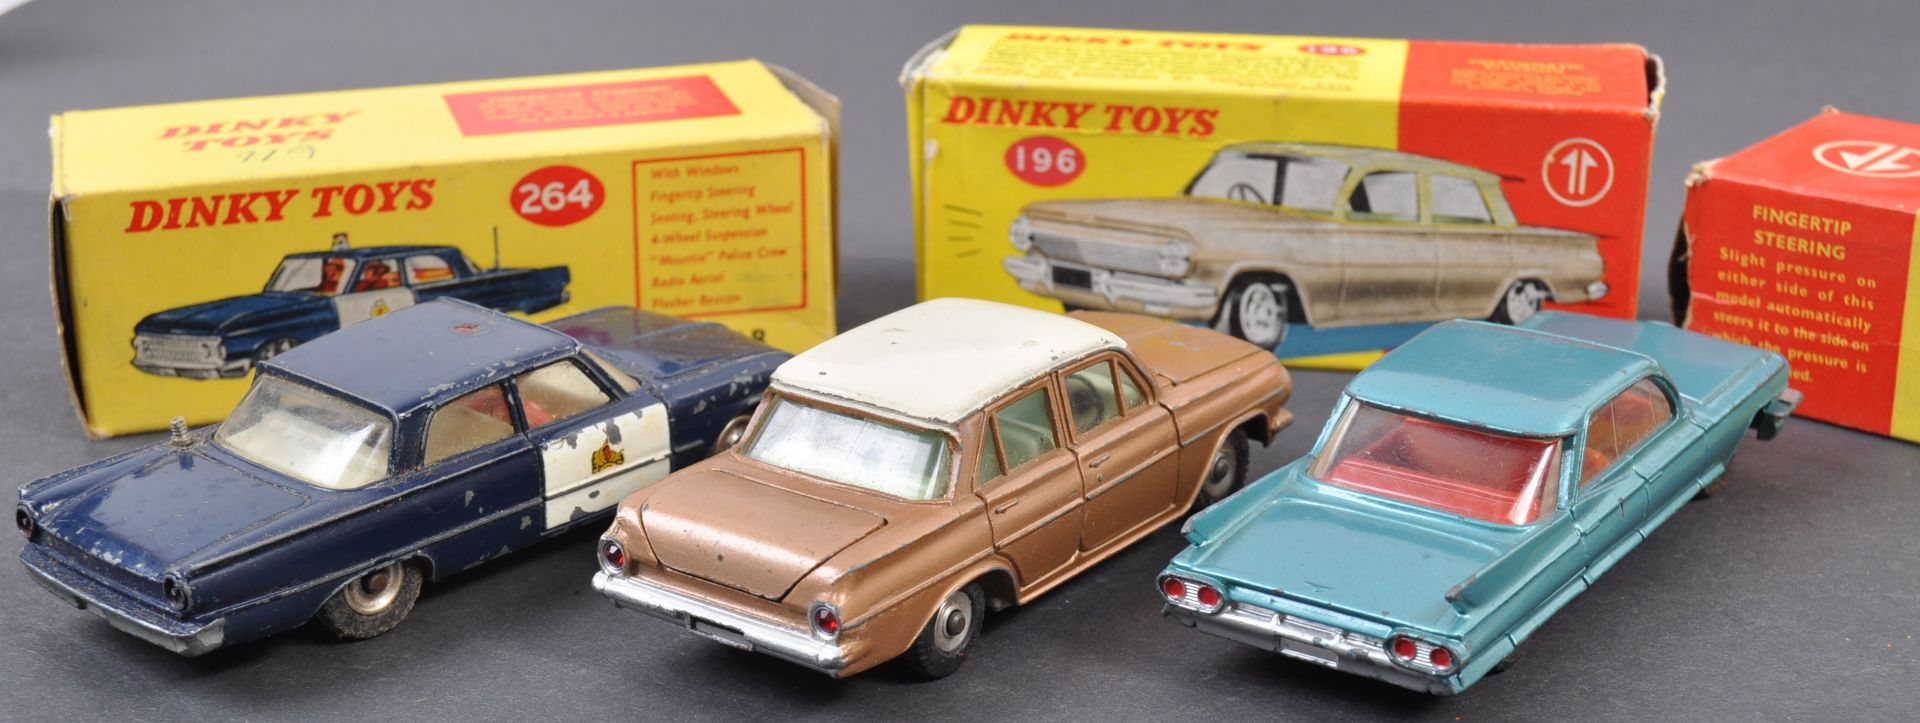 COLLECTION OF VINTAGE DINKY TOYS BOXED DIECAST MODELS - Bild 3 aus 4